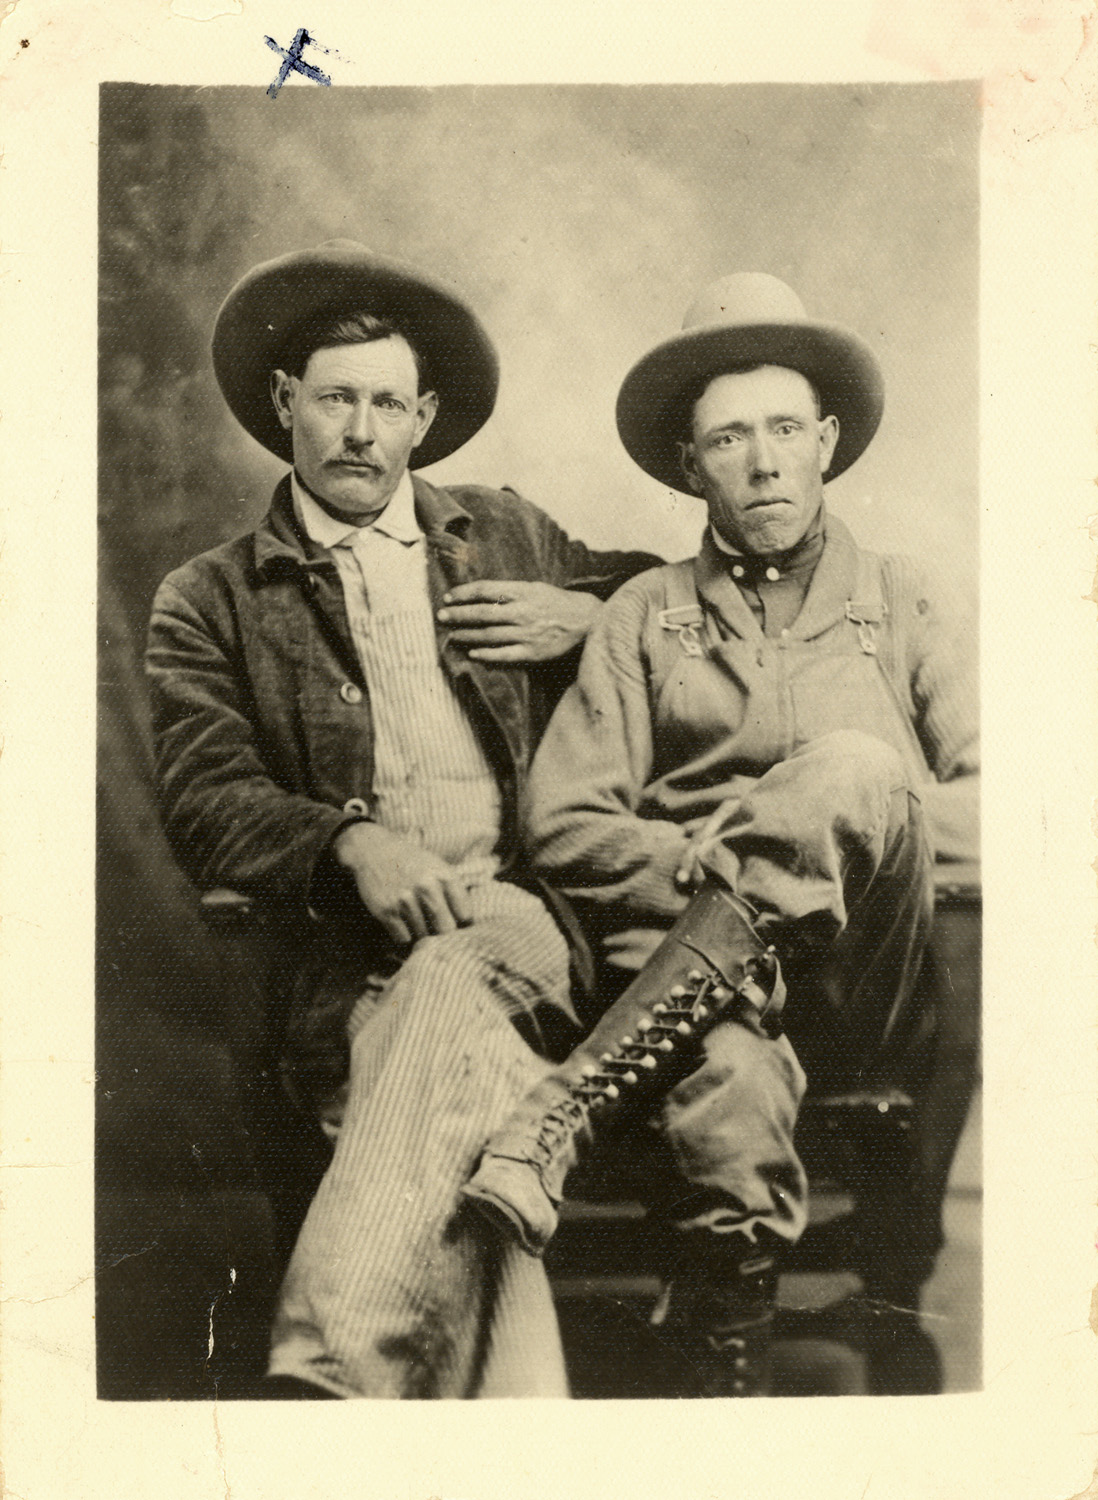 George Washington "Wash" Robertson and his brother Claude, Southern Oklahoma, c.1920. View full size.